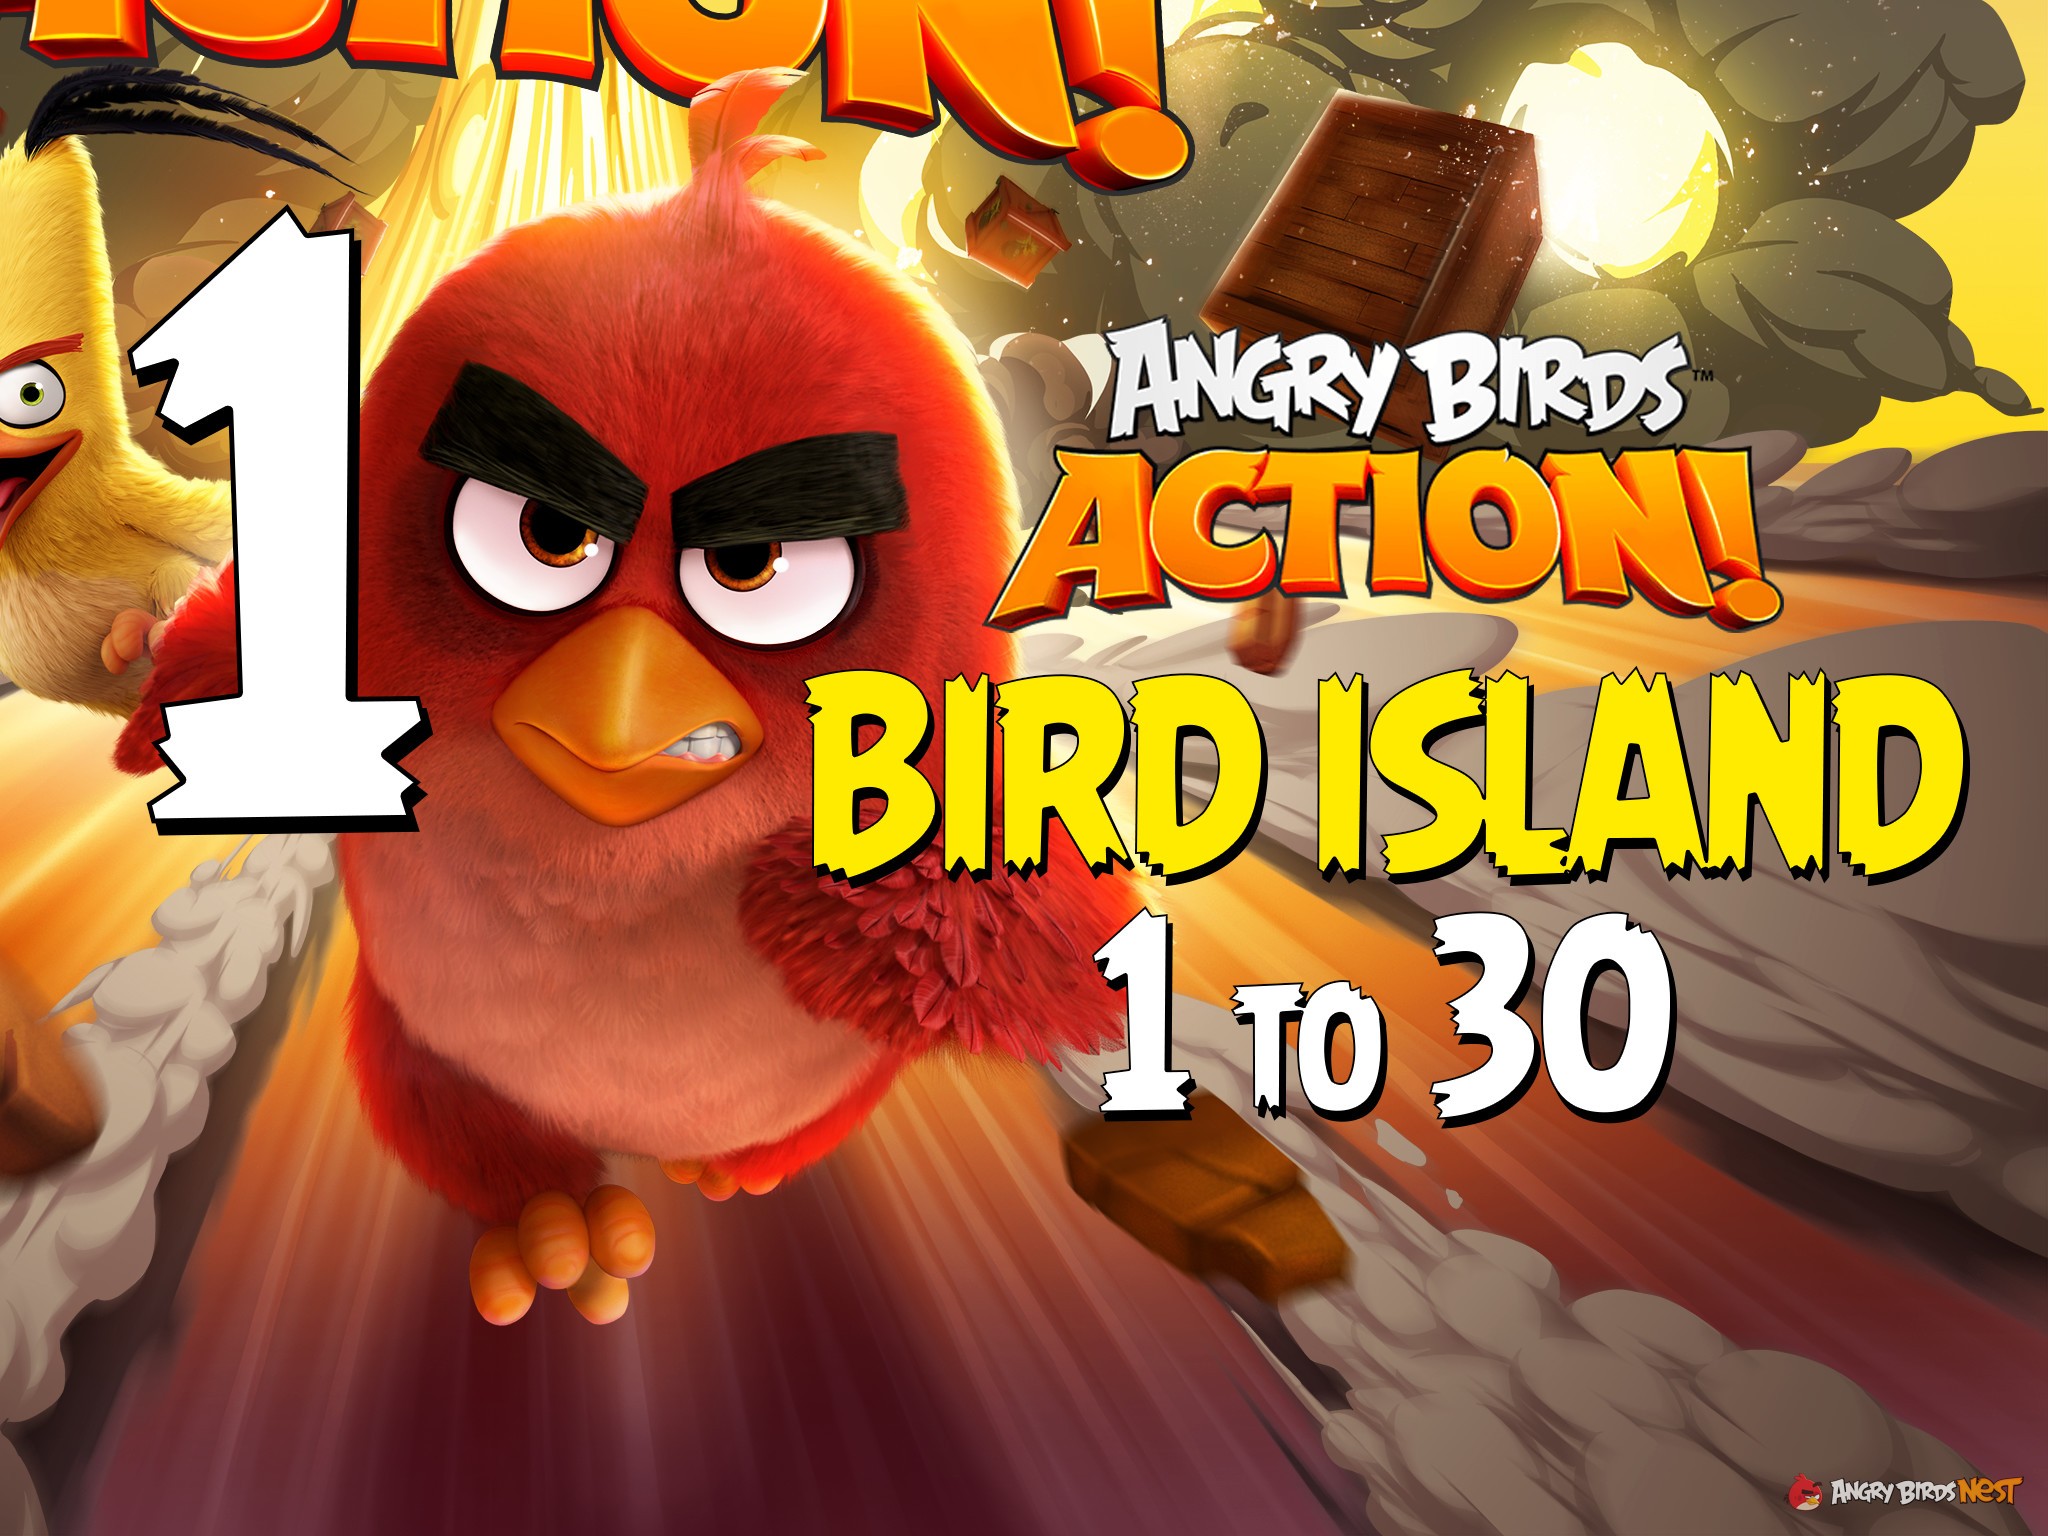 Angry Birds Action! Part 1 - Levels 1 to 30 - Bird Island